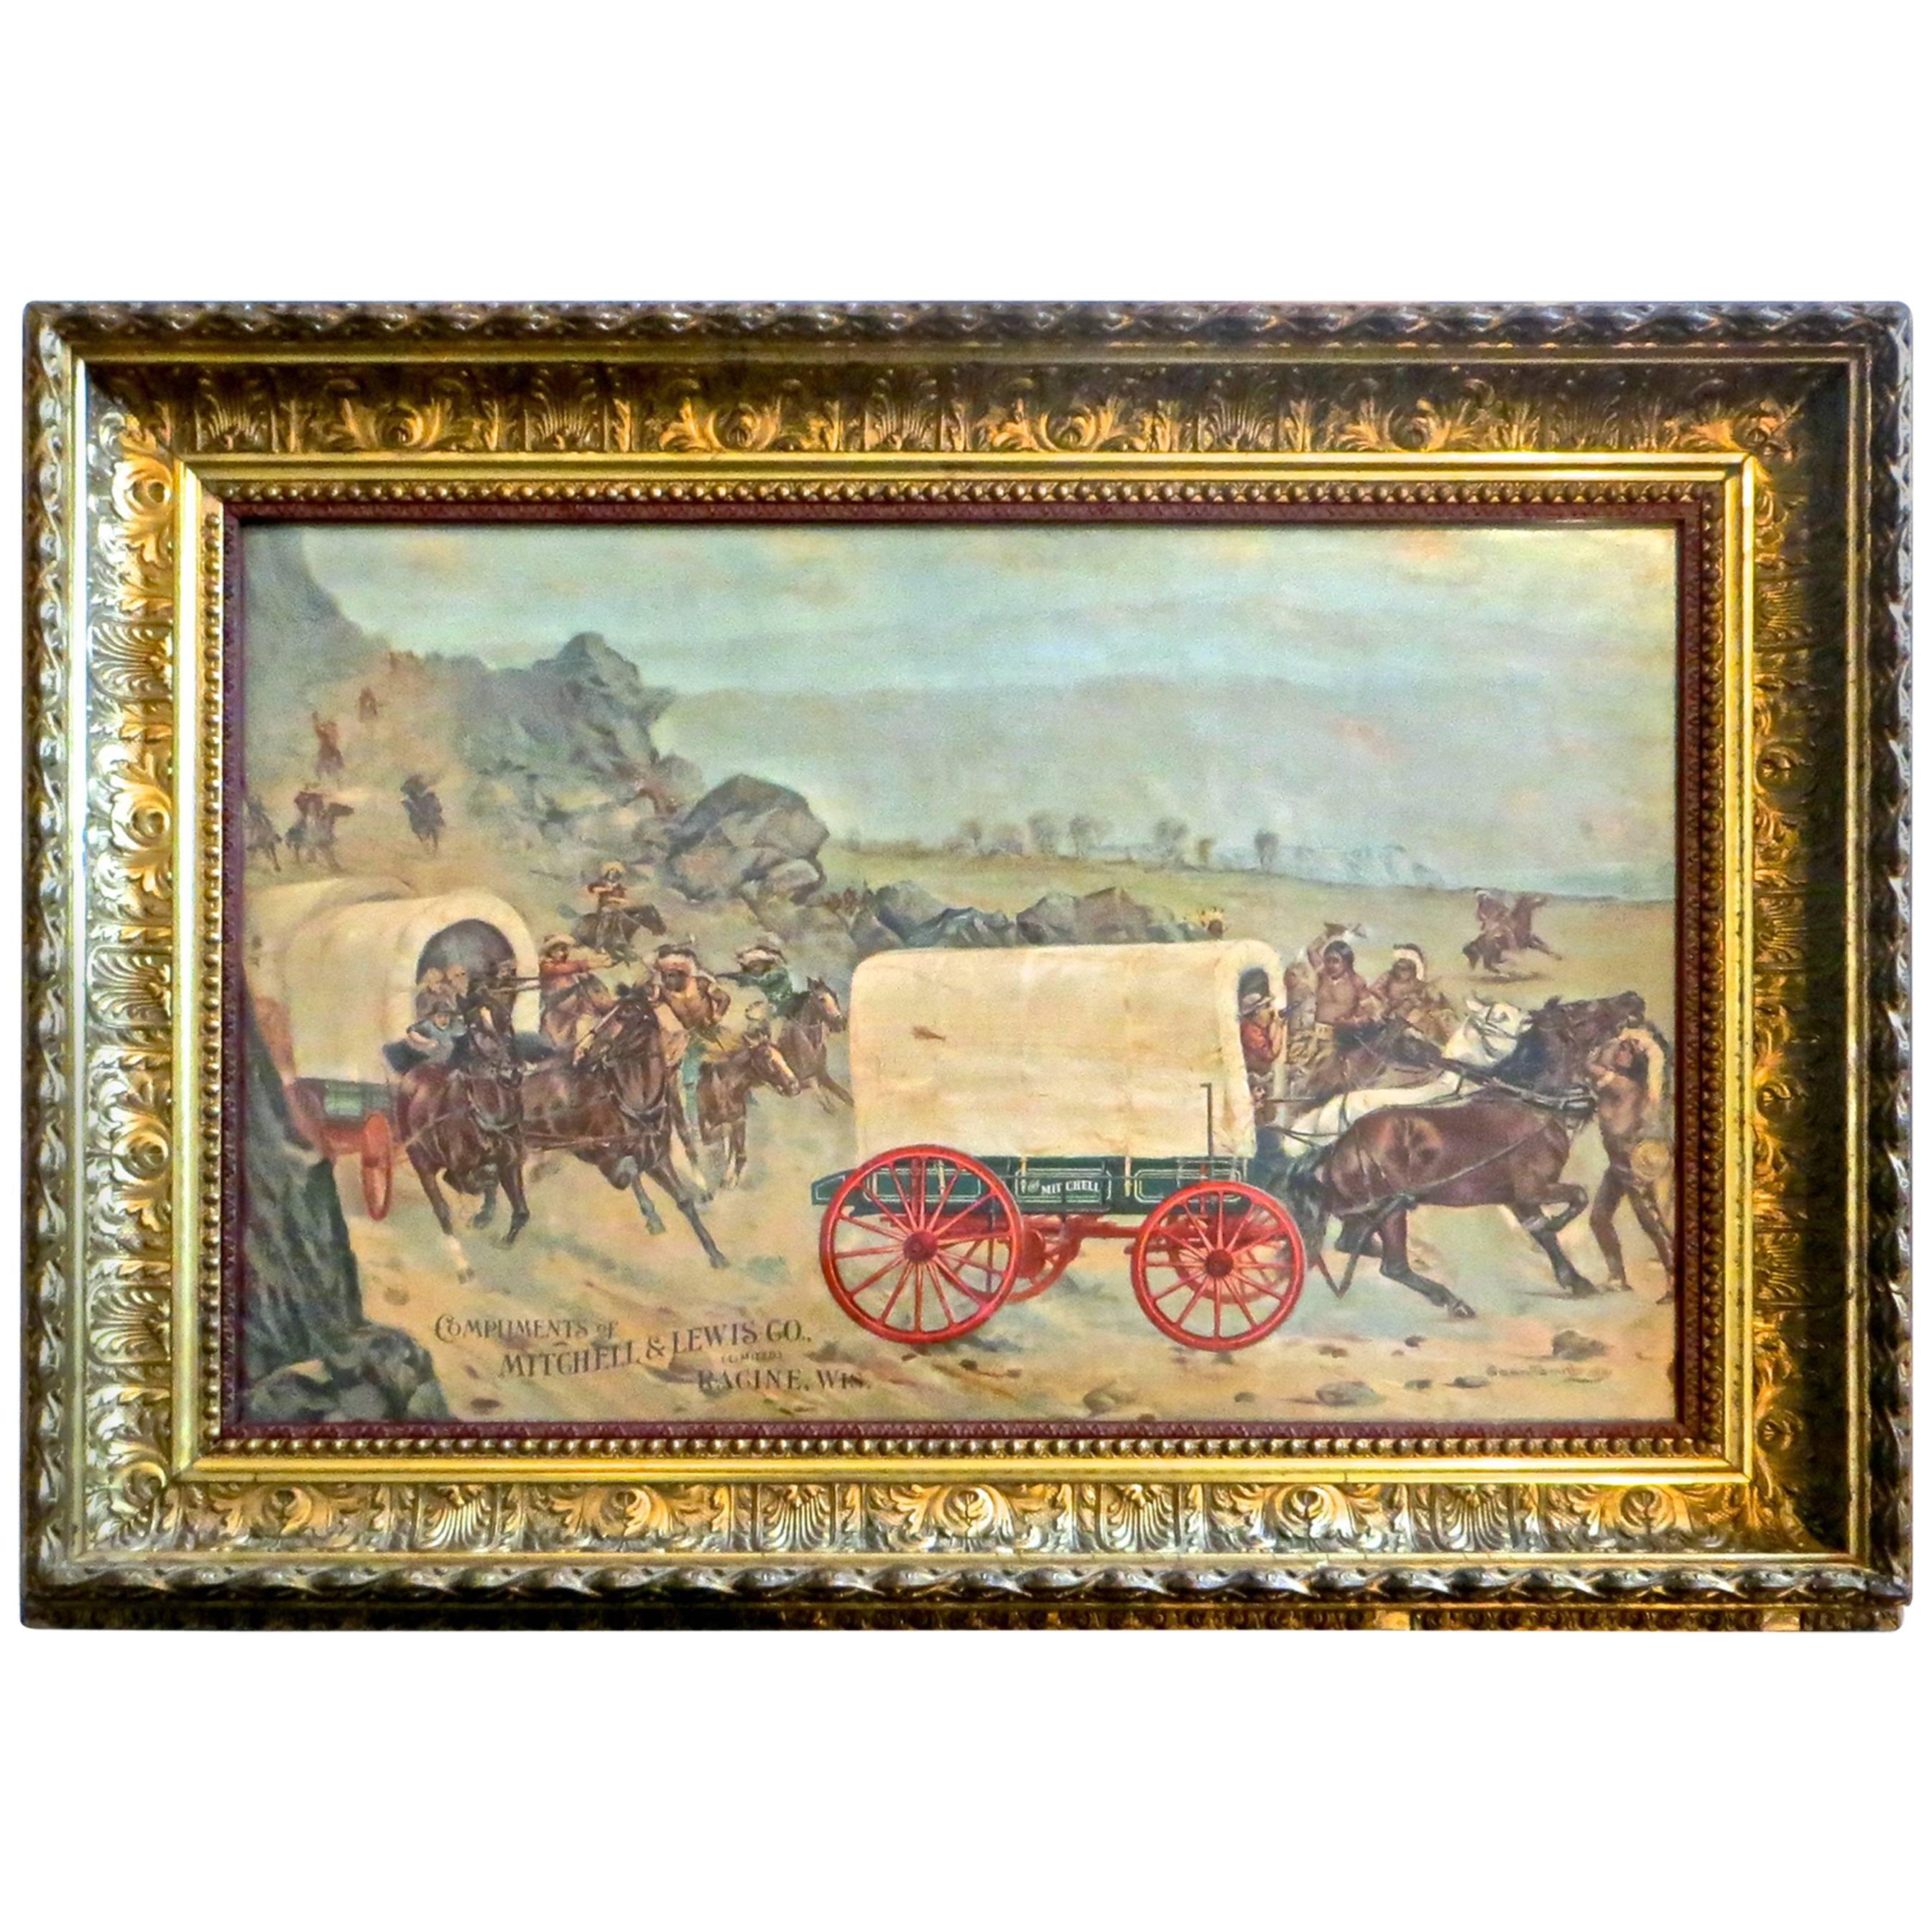 Mitchell & Lewis Covered Wagon Advertising Lithograph, American, circa 1901